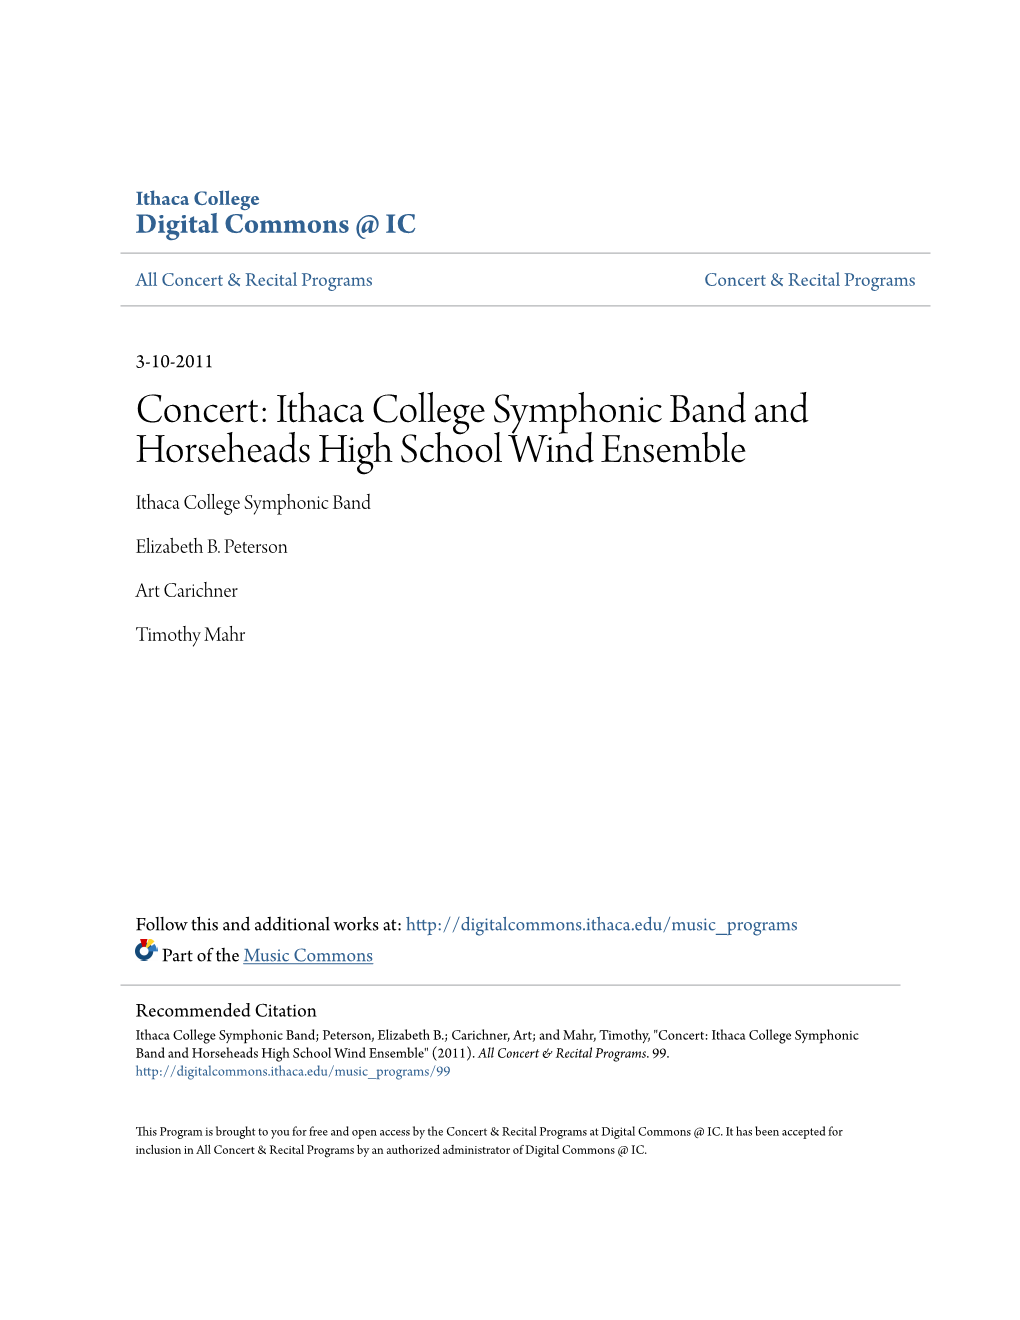 Concert: Ithaca College Symphonic Band and Horseheads High School Wind Ensemble Ithaca College Symphonic Band